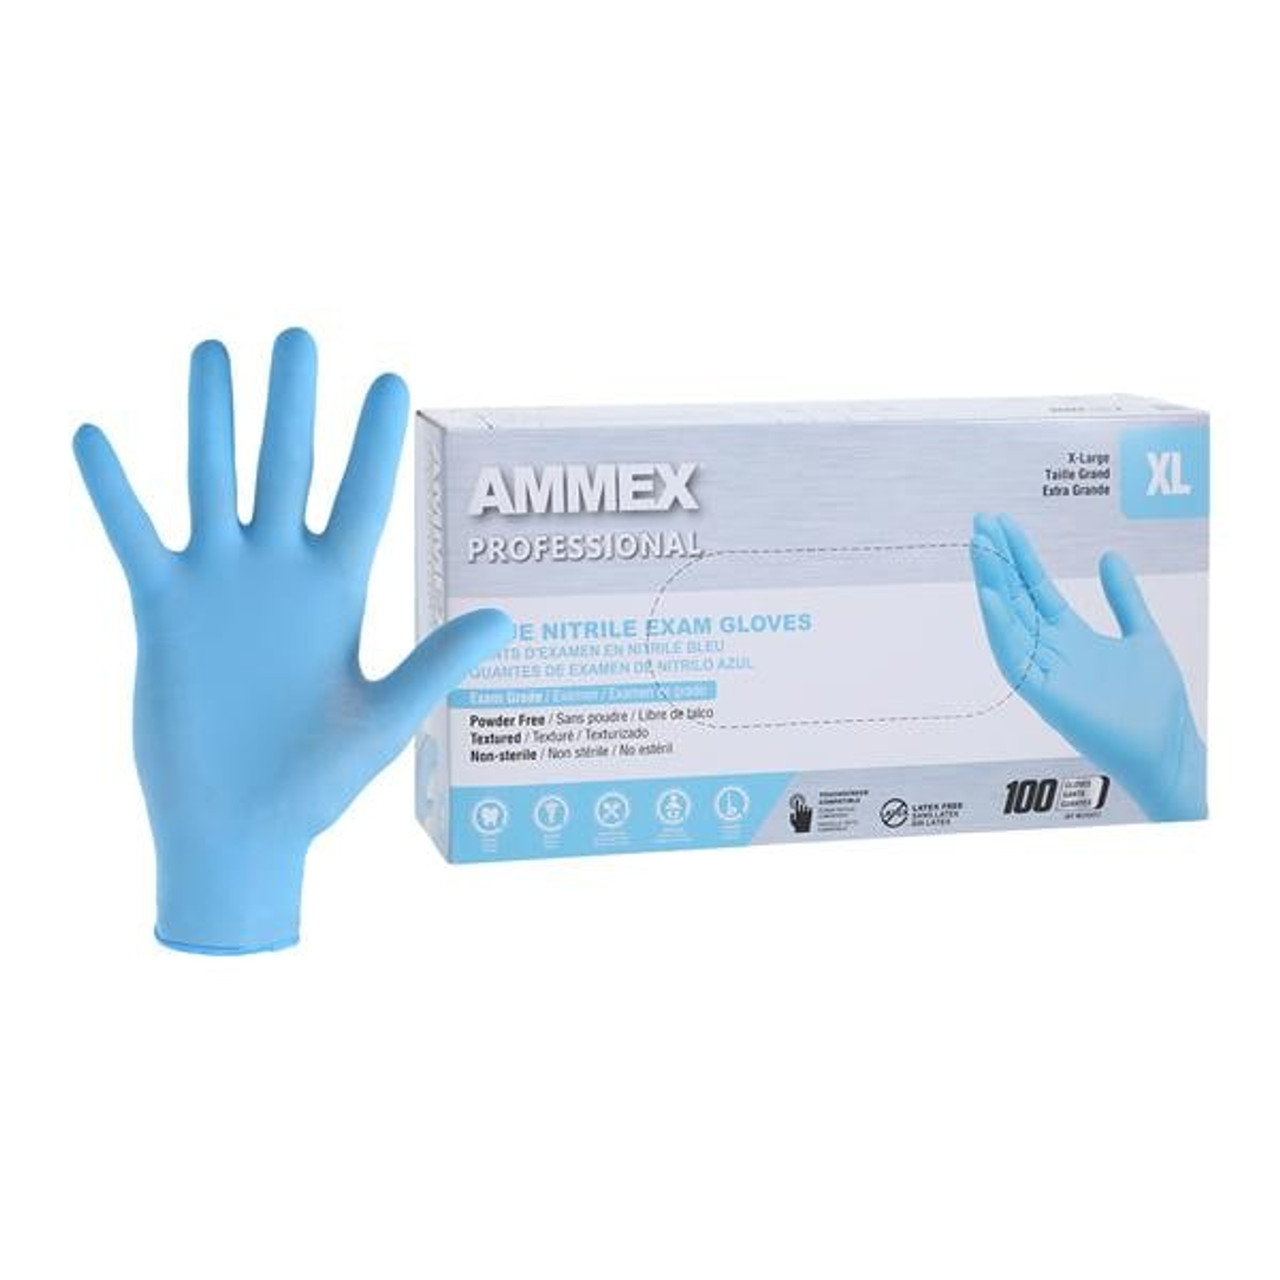 Ammex Nitrile Gloves (XL) X-Large Disposable Exam Grade Blue Powder Free Smooth Polymer Coated 100/bx 10bx/cs- XLGGLOVE(US Sales Only)